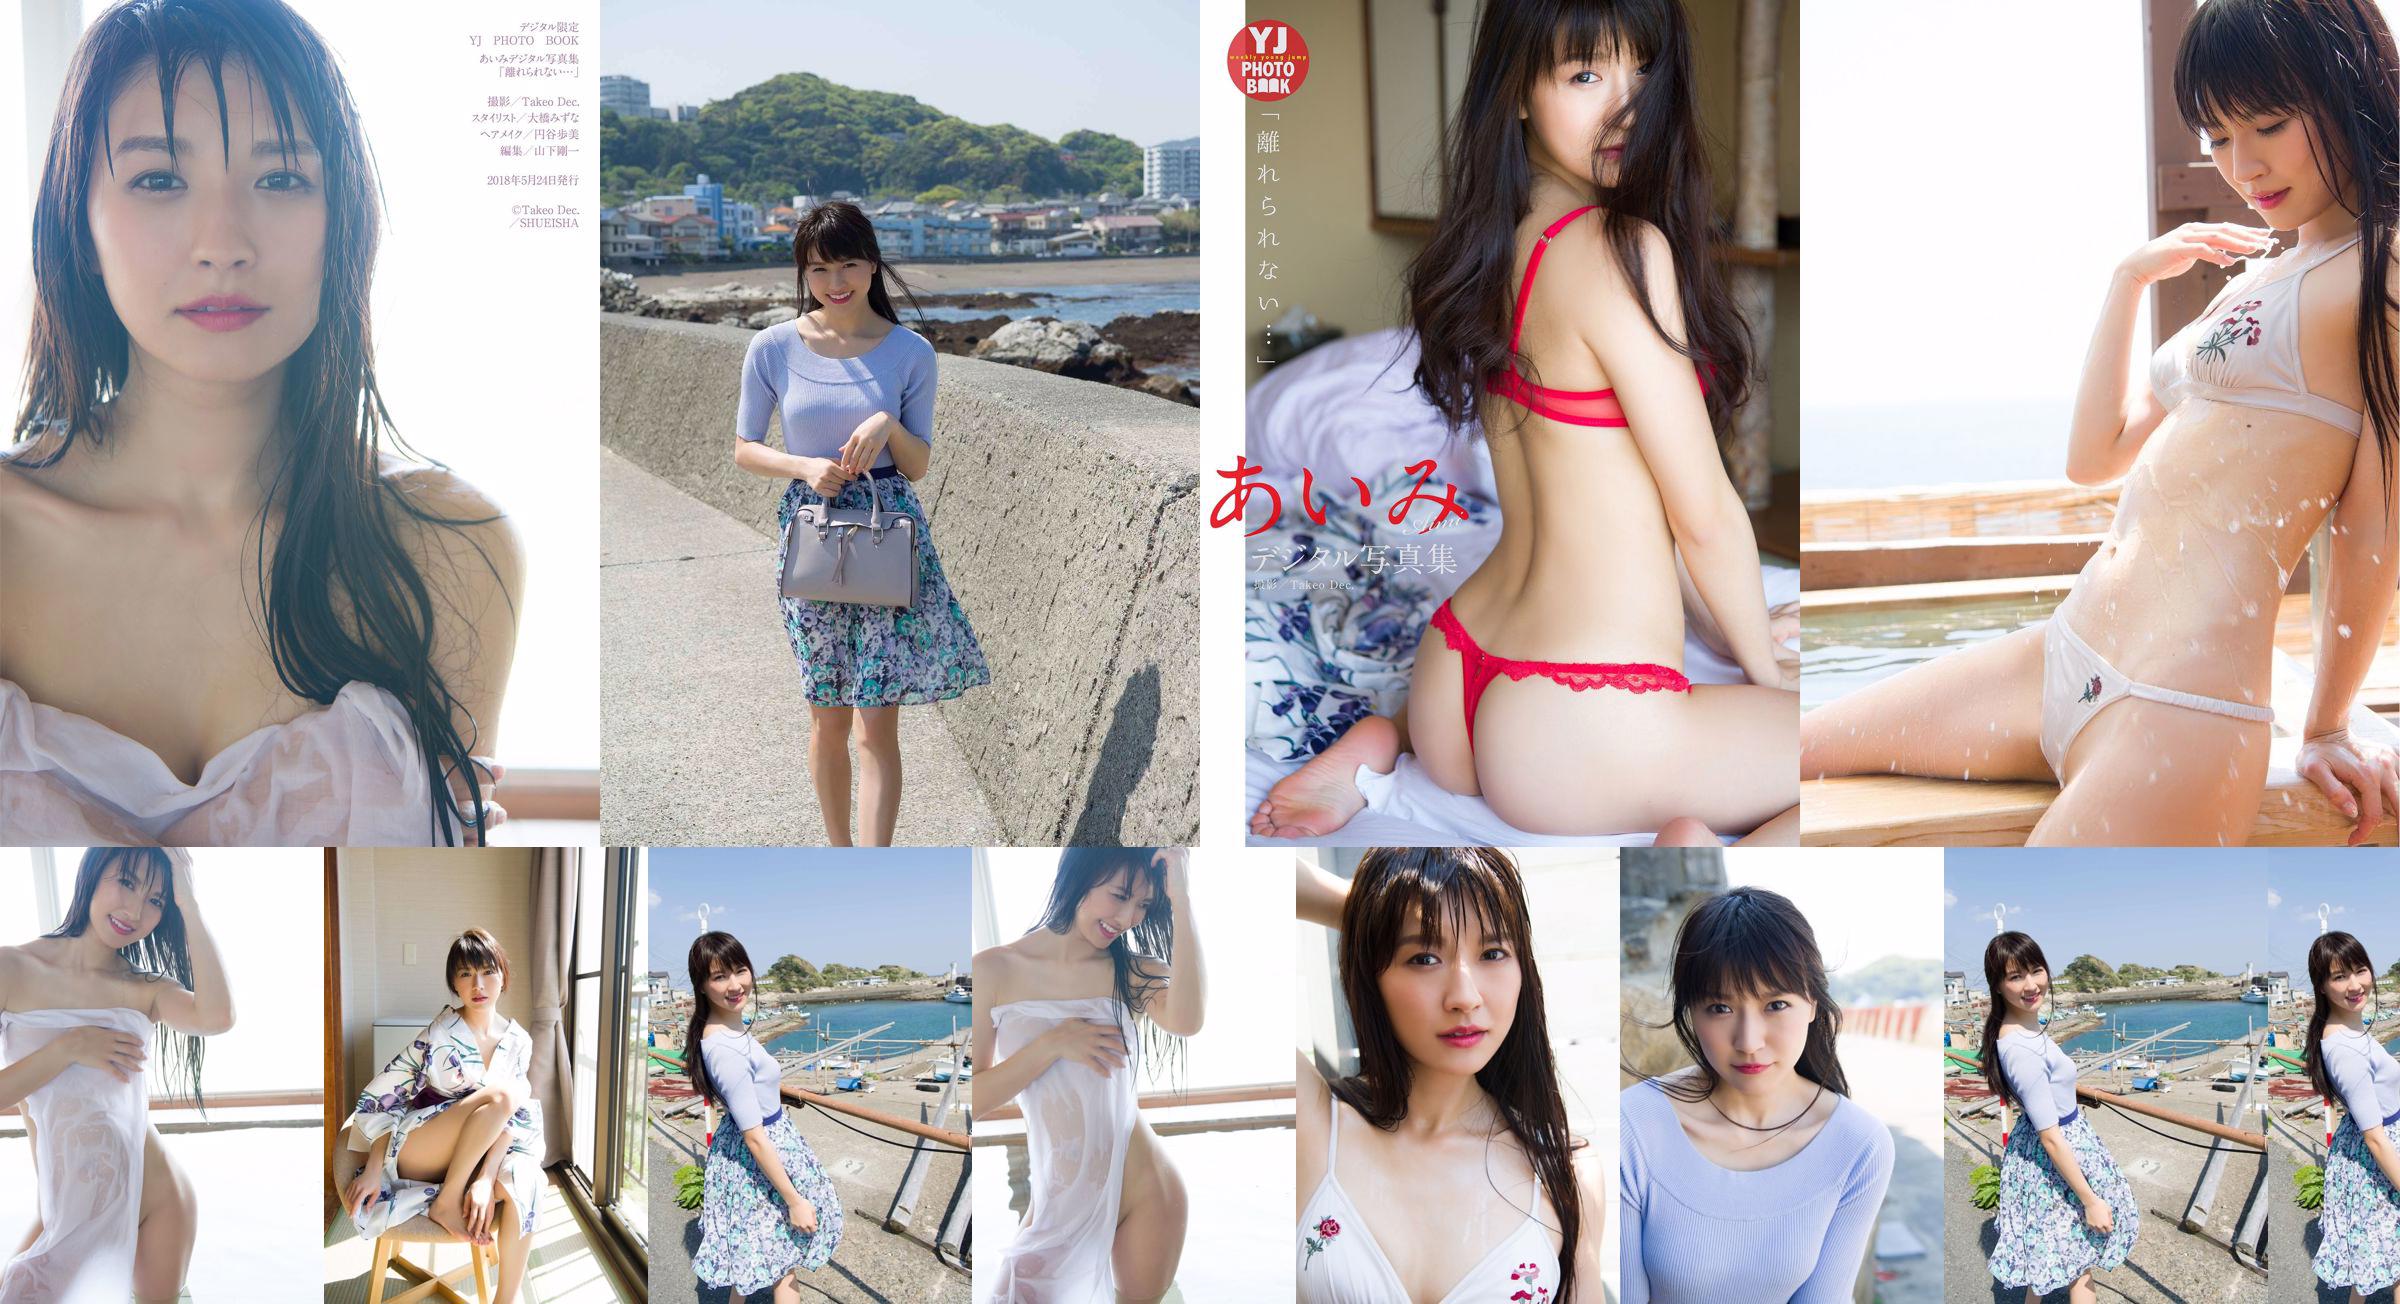 Aimi Nakano "I can't leave ..." [Digital Limited YJ PHOTO BOOK] No.144848 Page 10